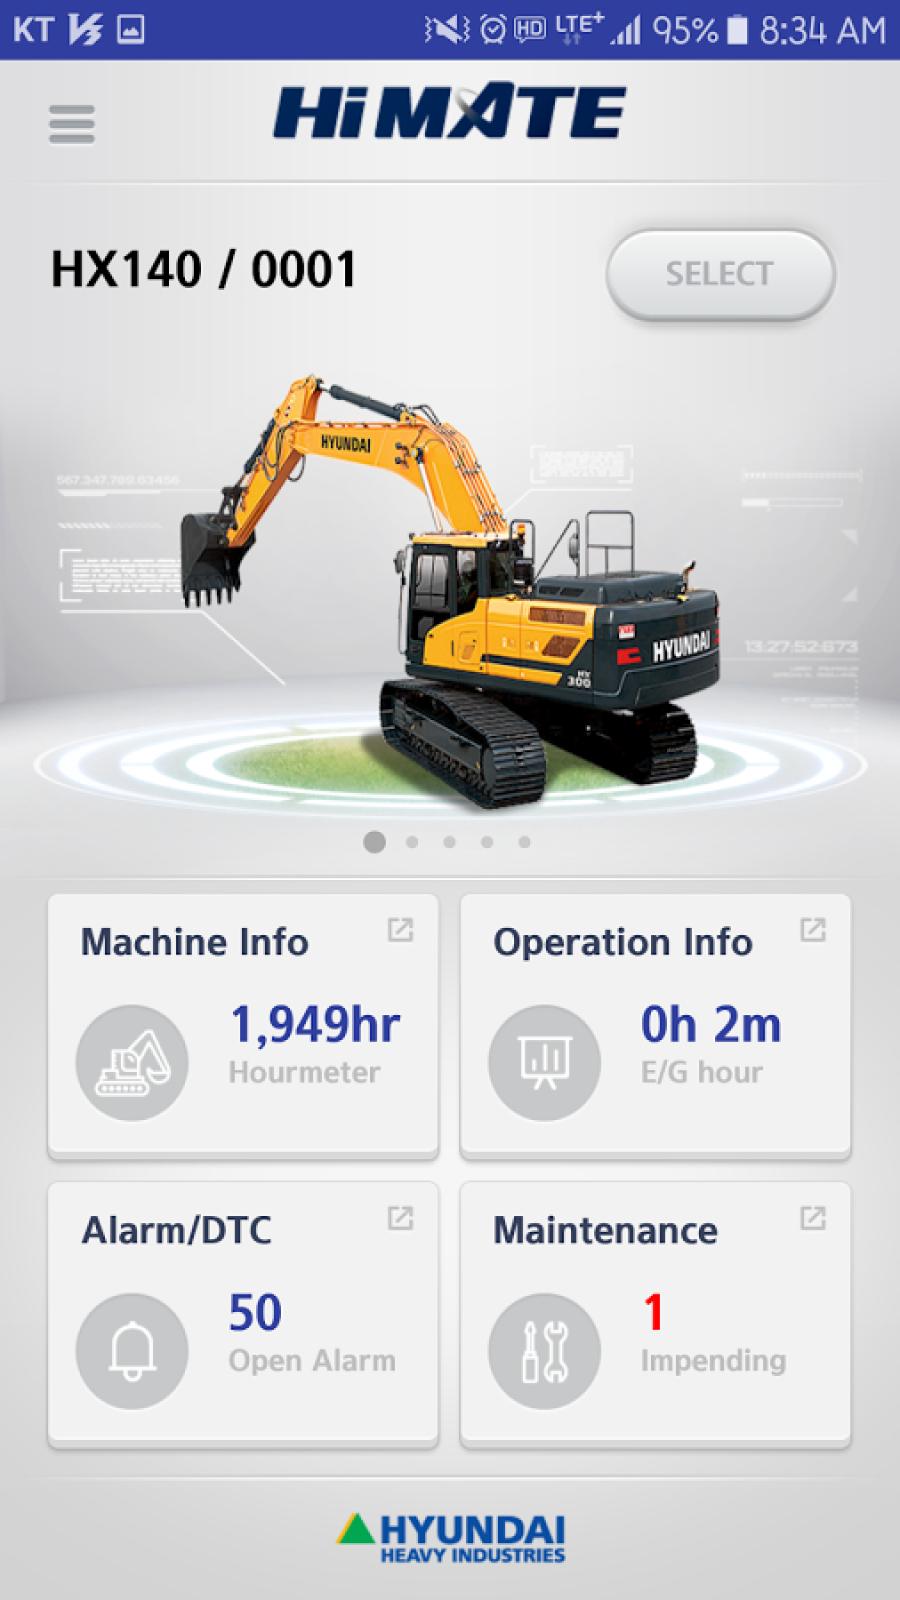 The new mobile application for Hyundai’s Hi-Mate remote management system provides equipment owners and managers comprehensive location and operational monitoring for their Hyundai wheel loaders and excavators. The mobile app is available for use on smartphones and other devices that use the Android operating system.